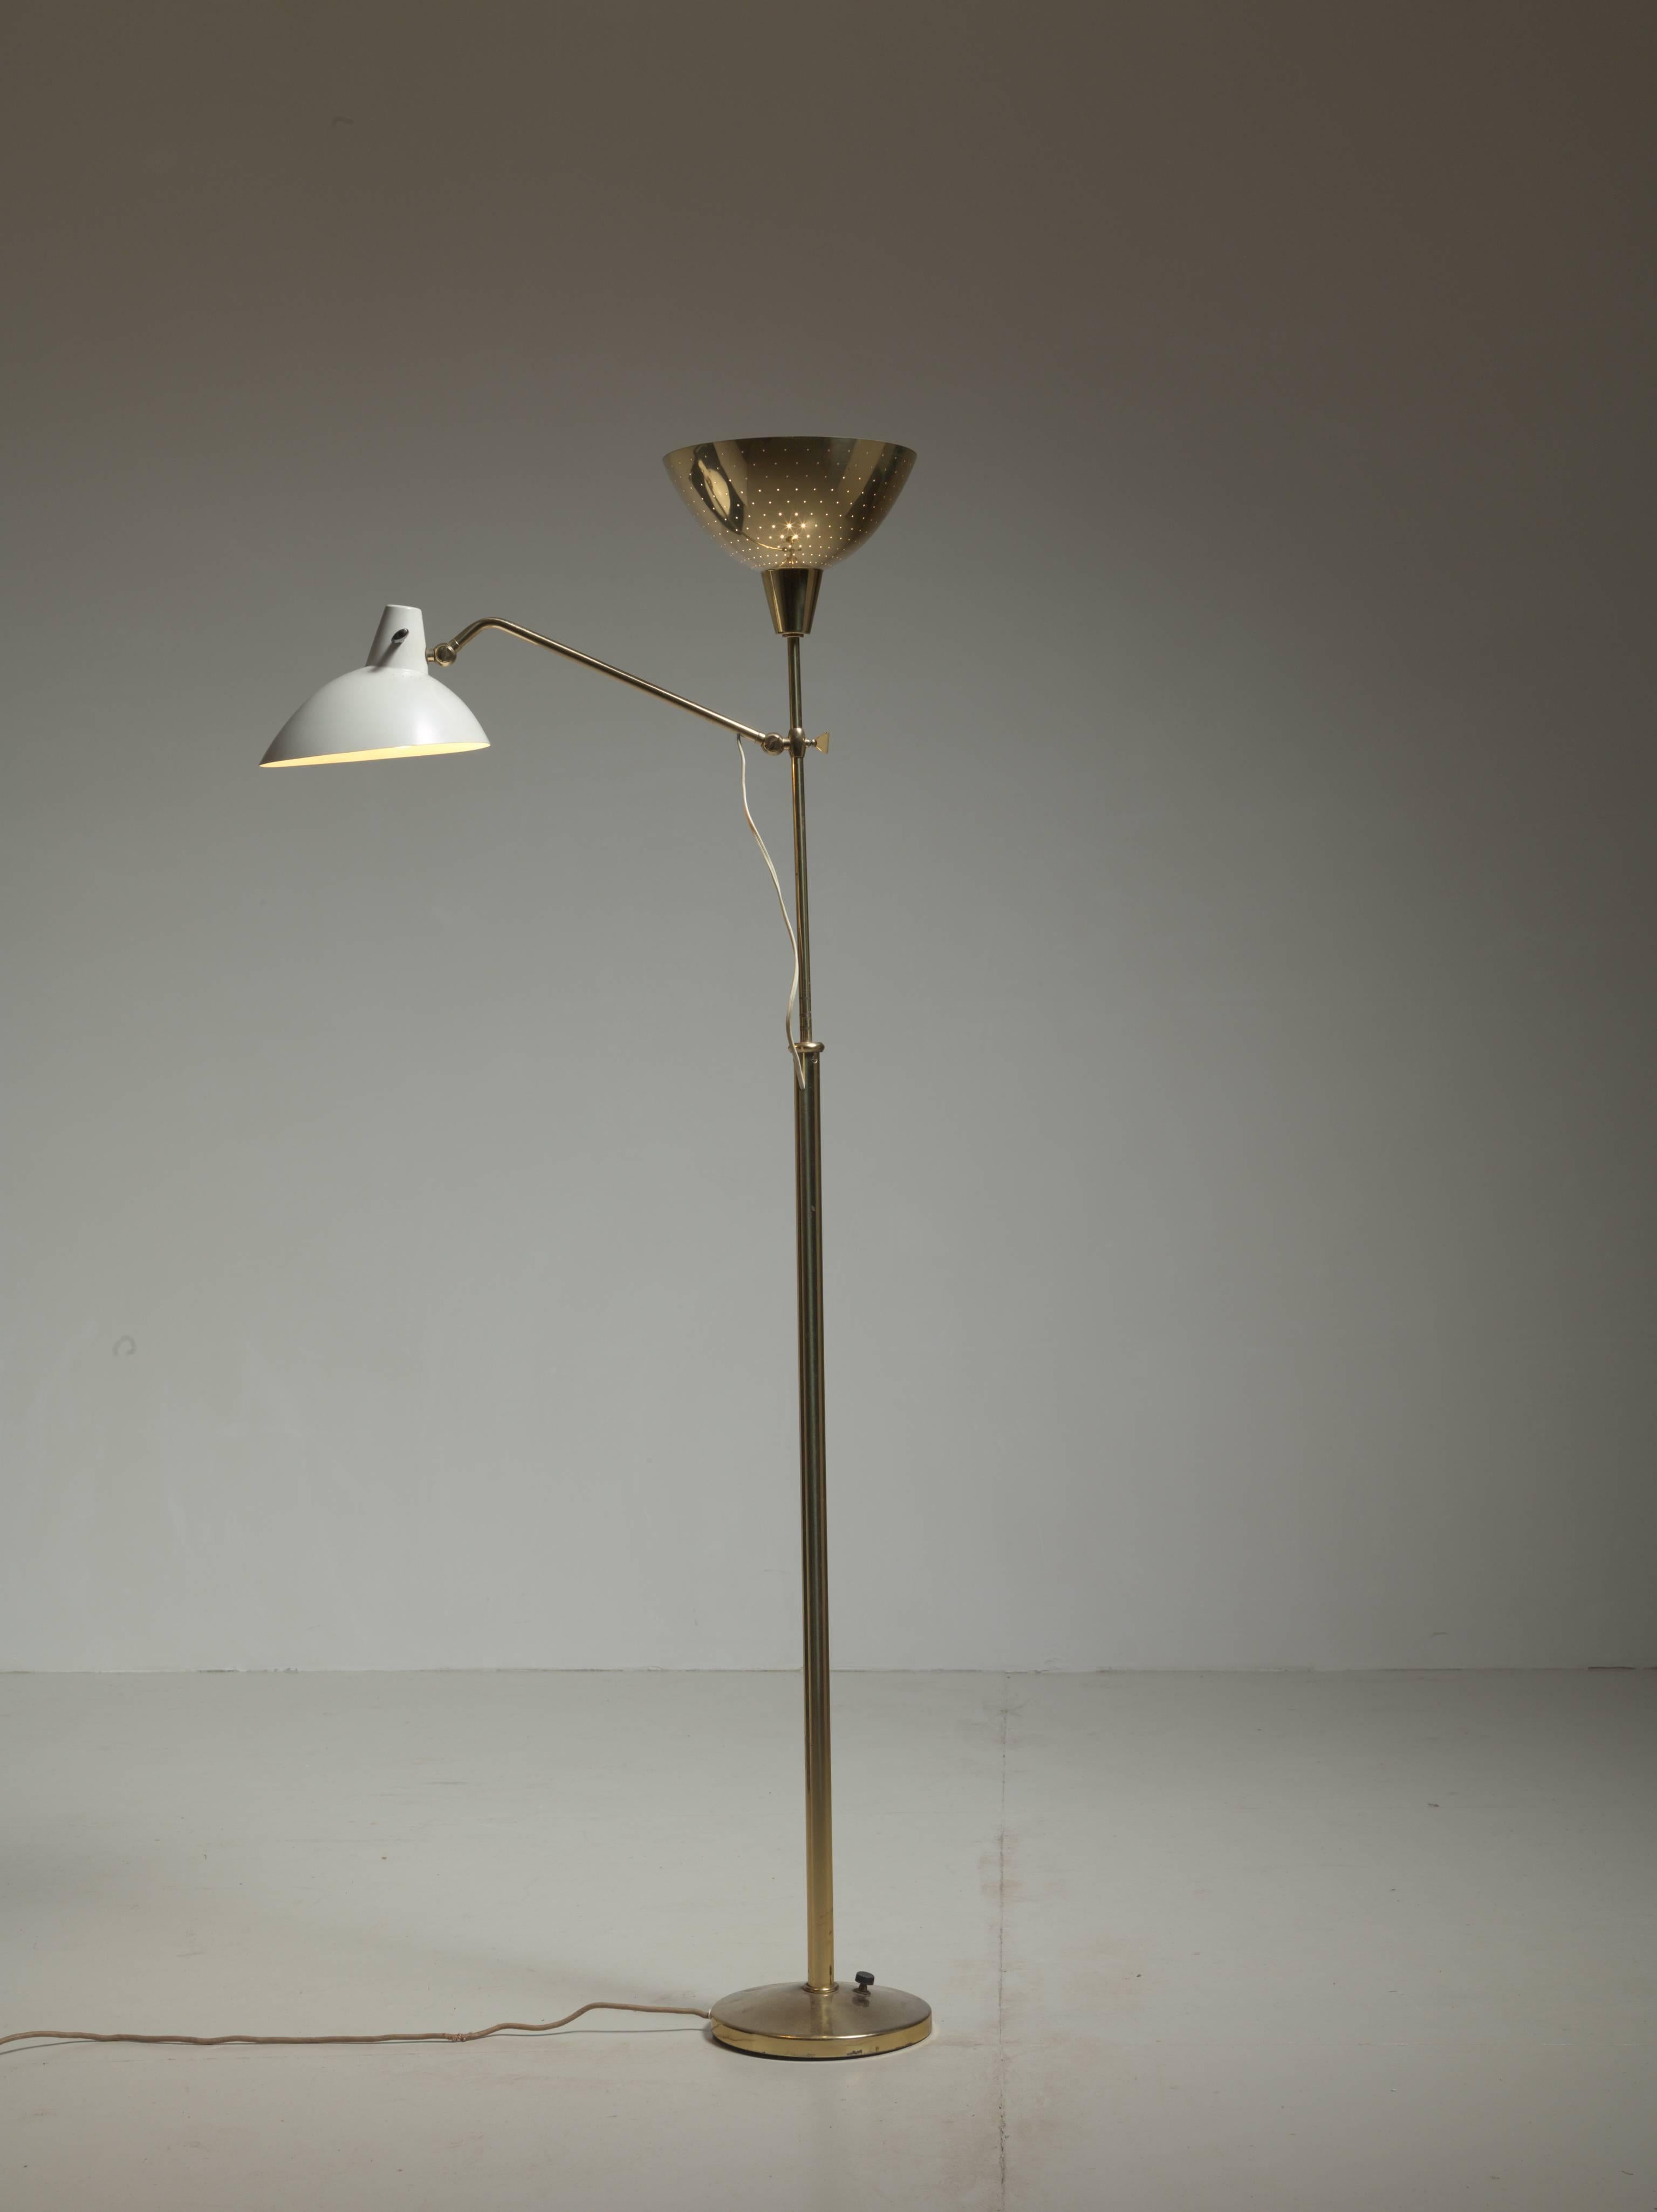 Mid-Century Modern Floor Lamp with Two Shades by Alfred Muller for AMBA, Switzerland, 1940s For Sale